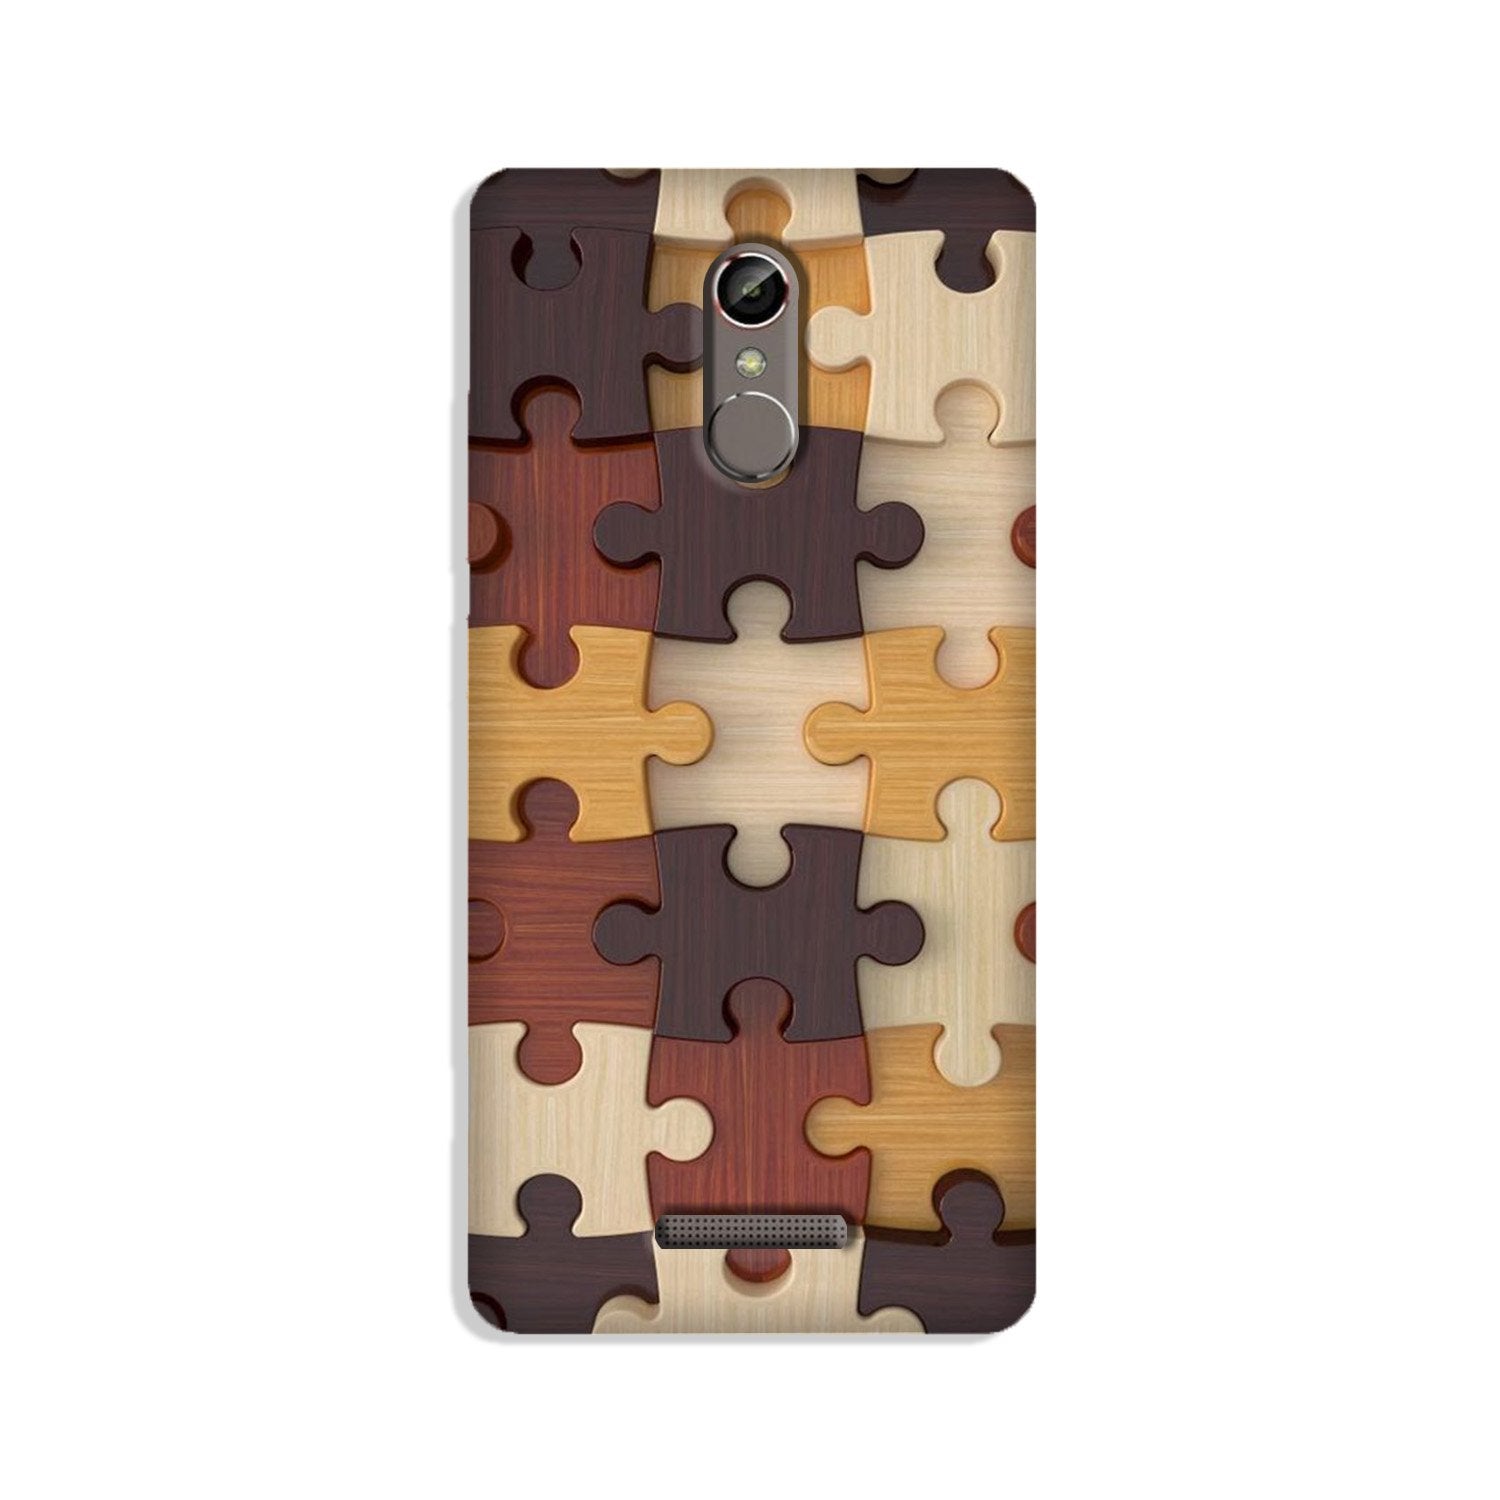 Puzzle Pattern Case for Gionee S6s (Design No. 217)